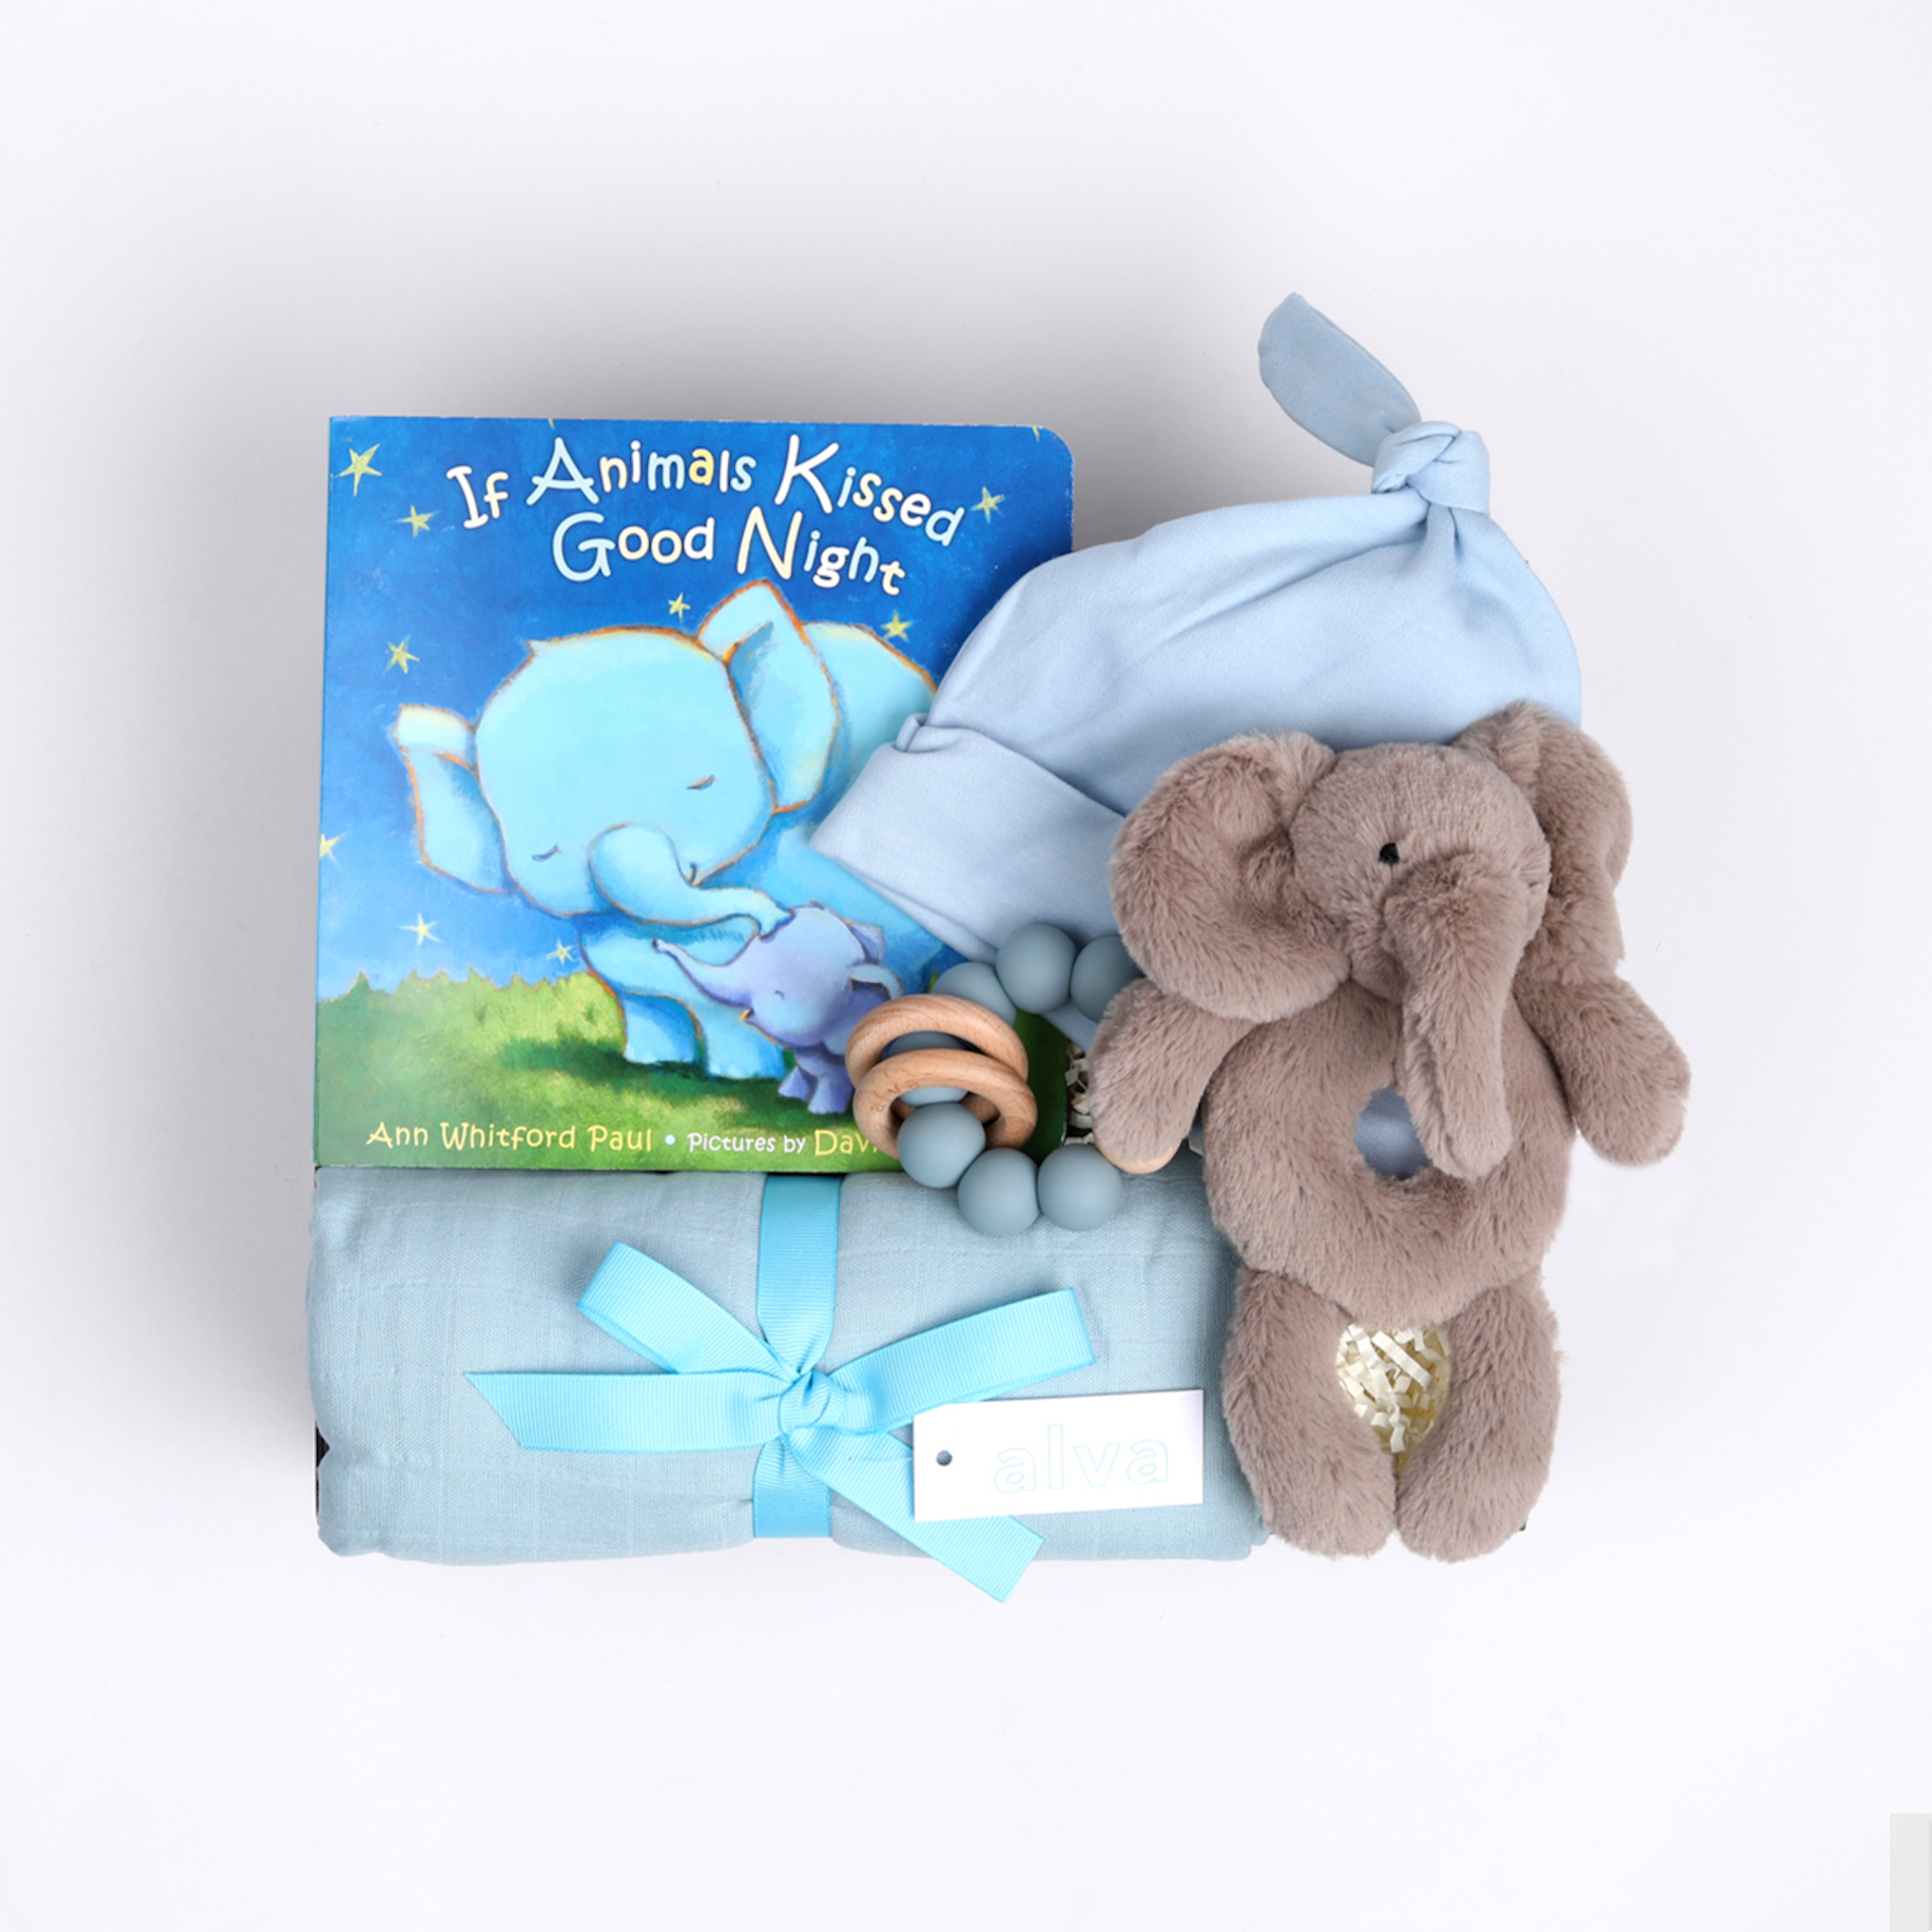 BOXFOX New Baby Boy Box in creme, including a swaddle, elephant rattle, teether, hat and book.